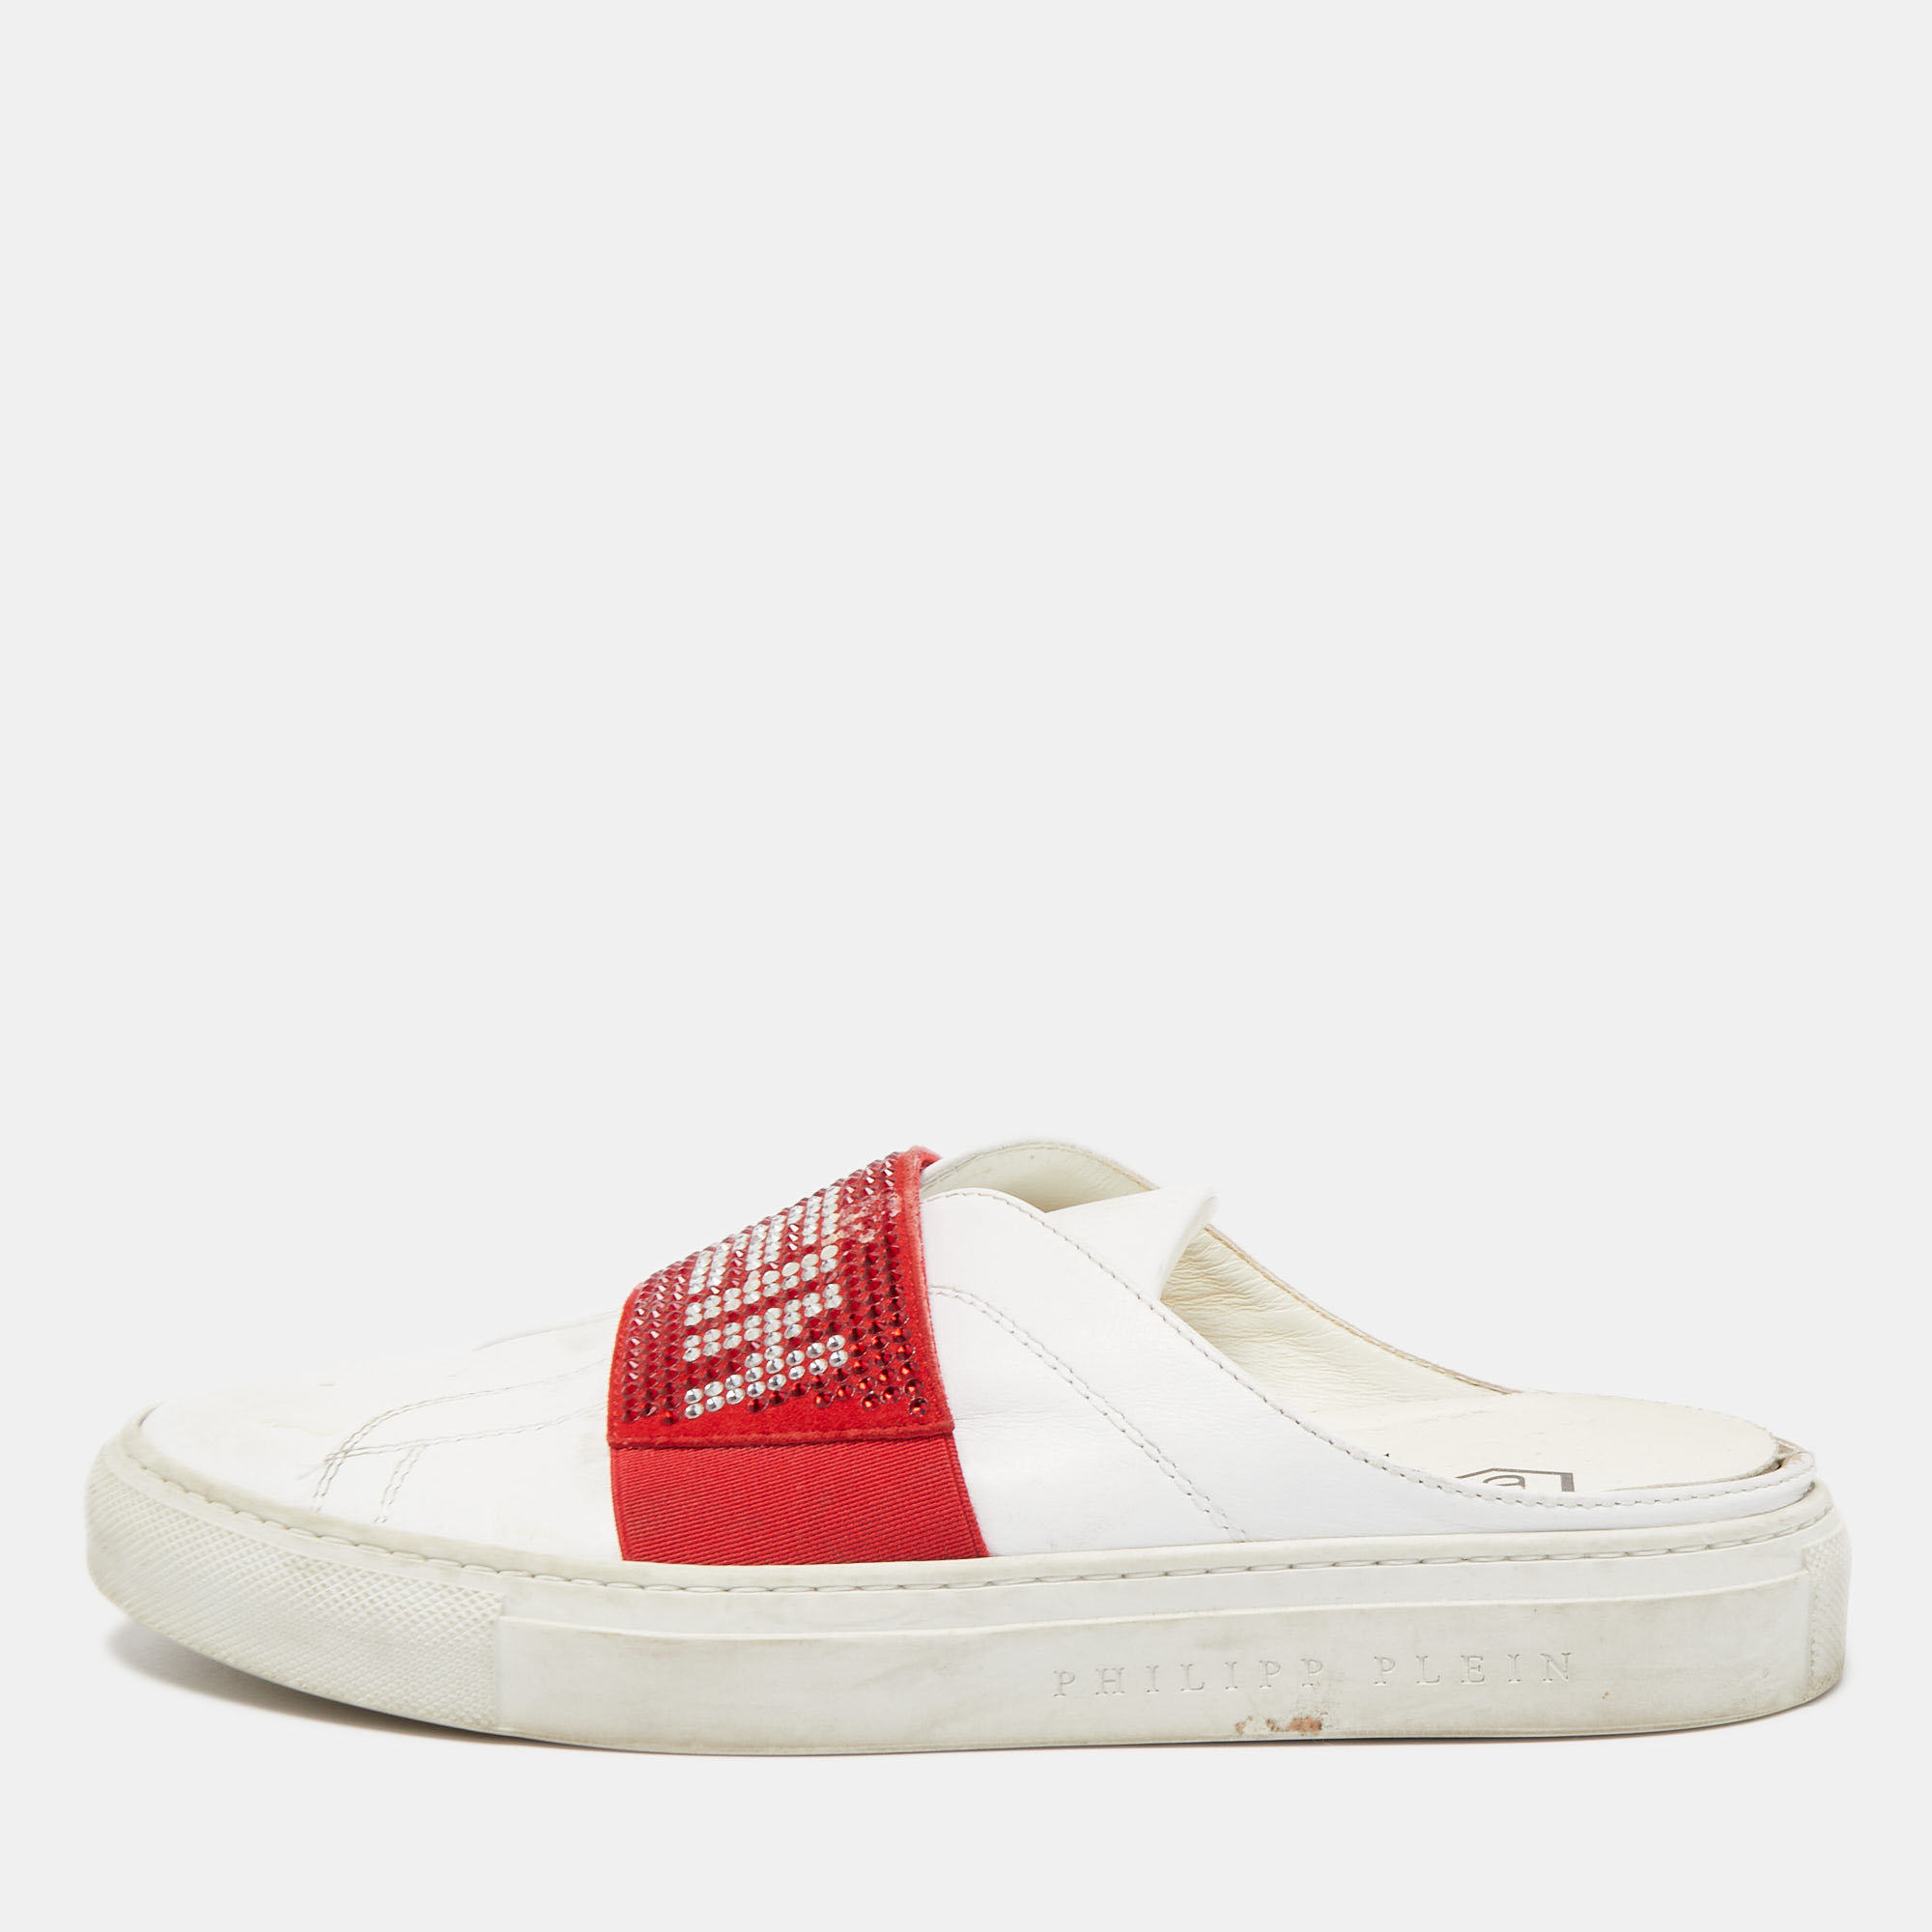 

Phillip Plein White/Red Leather Crystal Embellished Logo Sneaker Mules Size